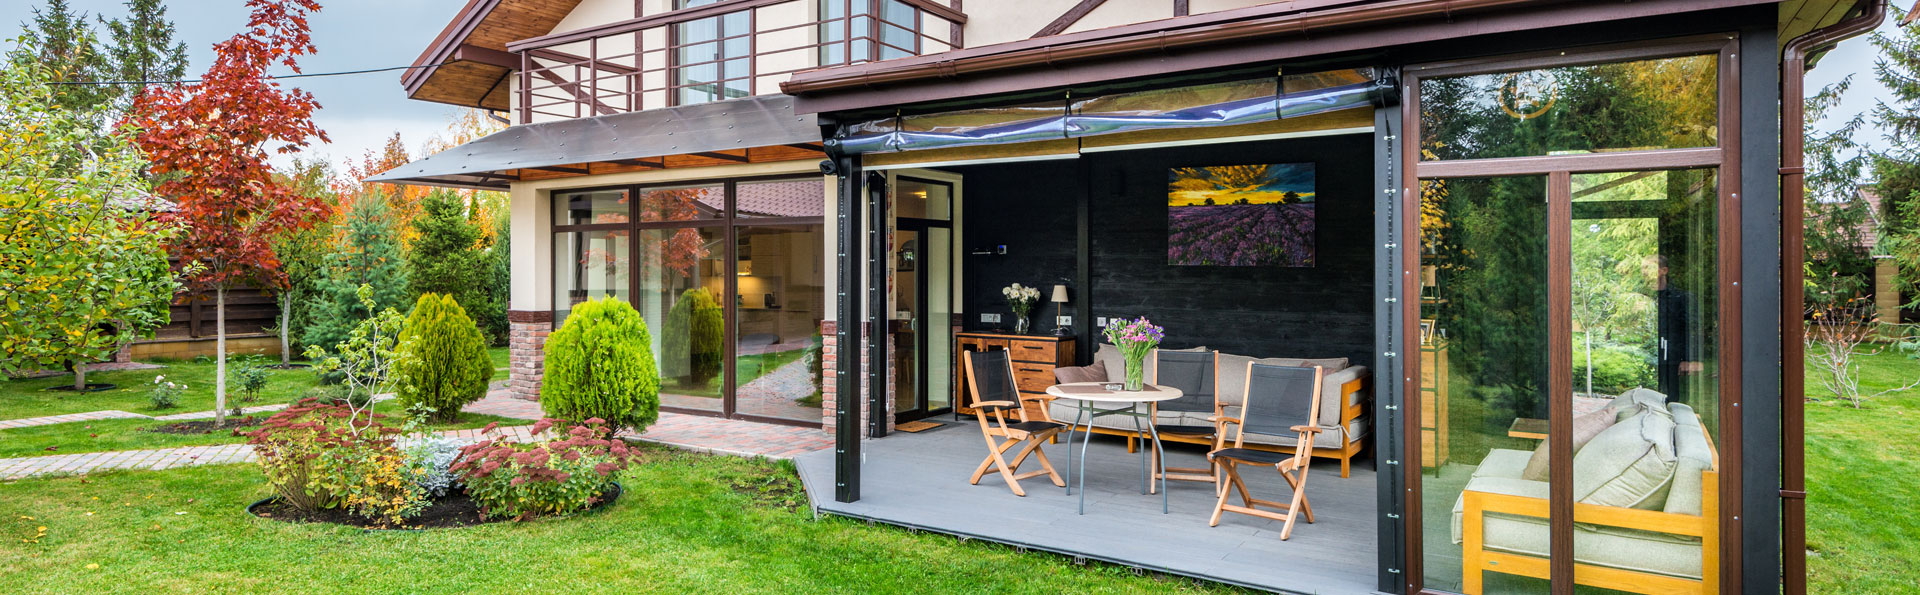 Sunroom vs Screened Porch: Understanding the Differences